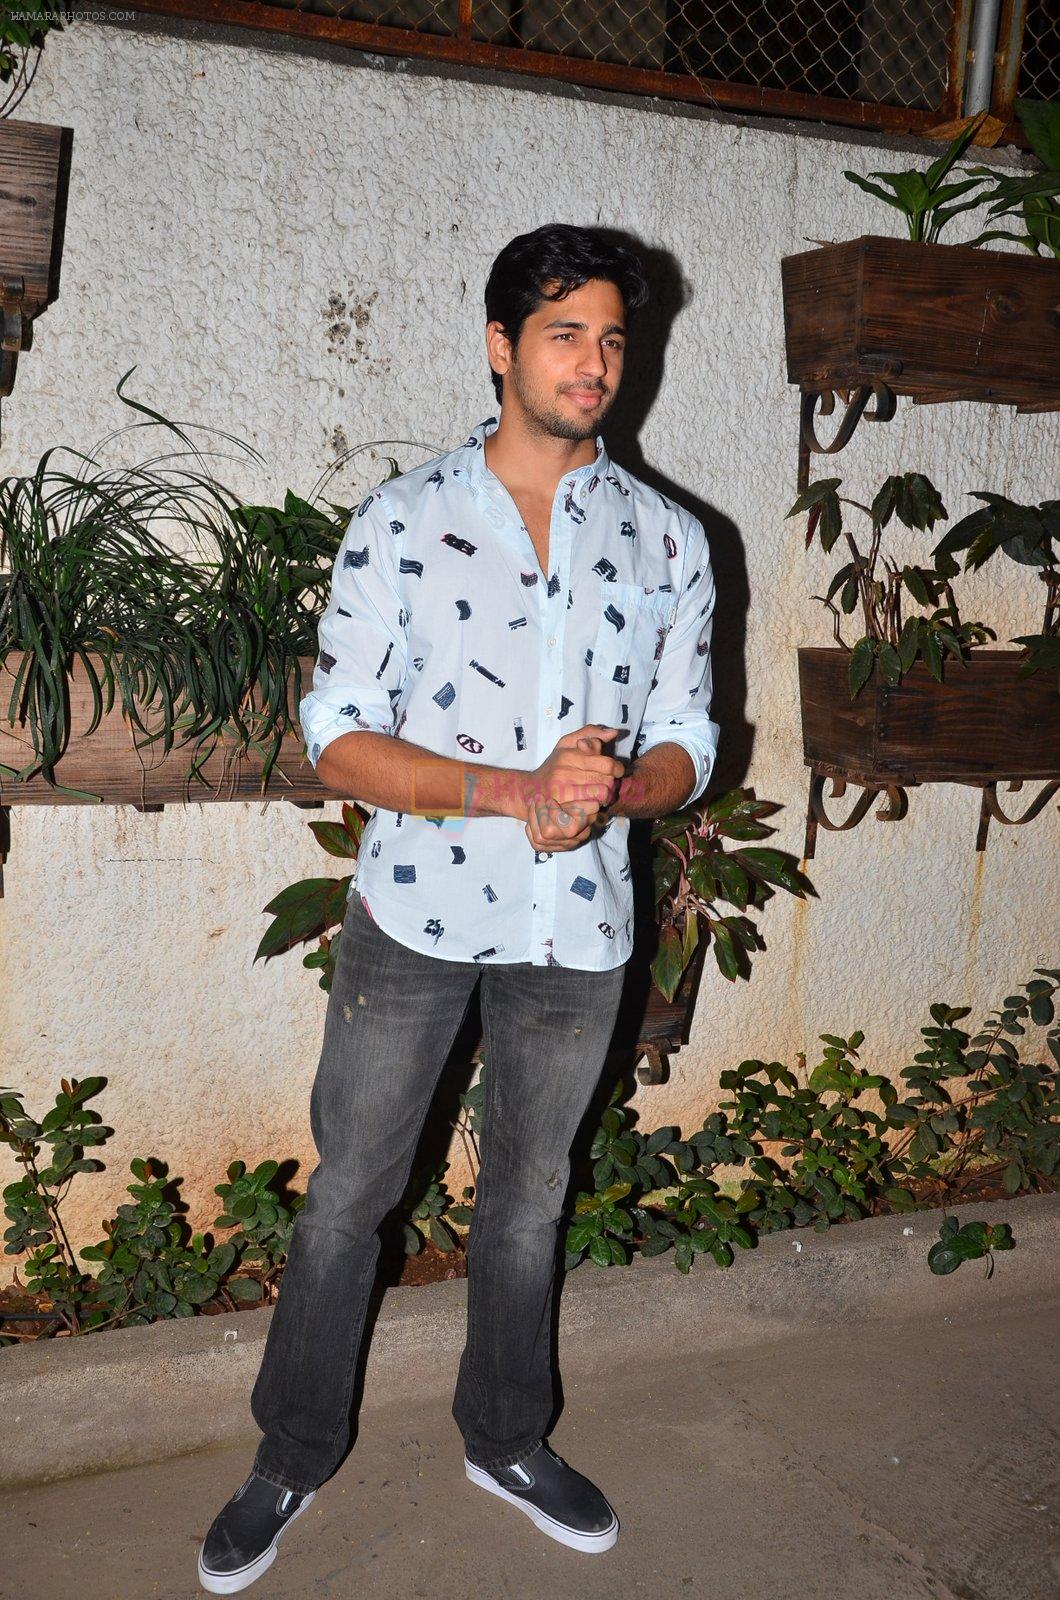 sidharth Malhotra's screening for kapoor n sons on 17th March 2016